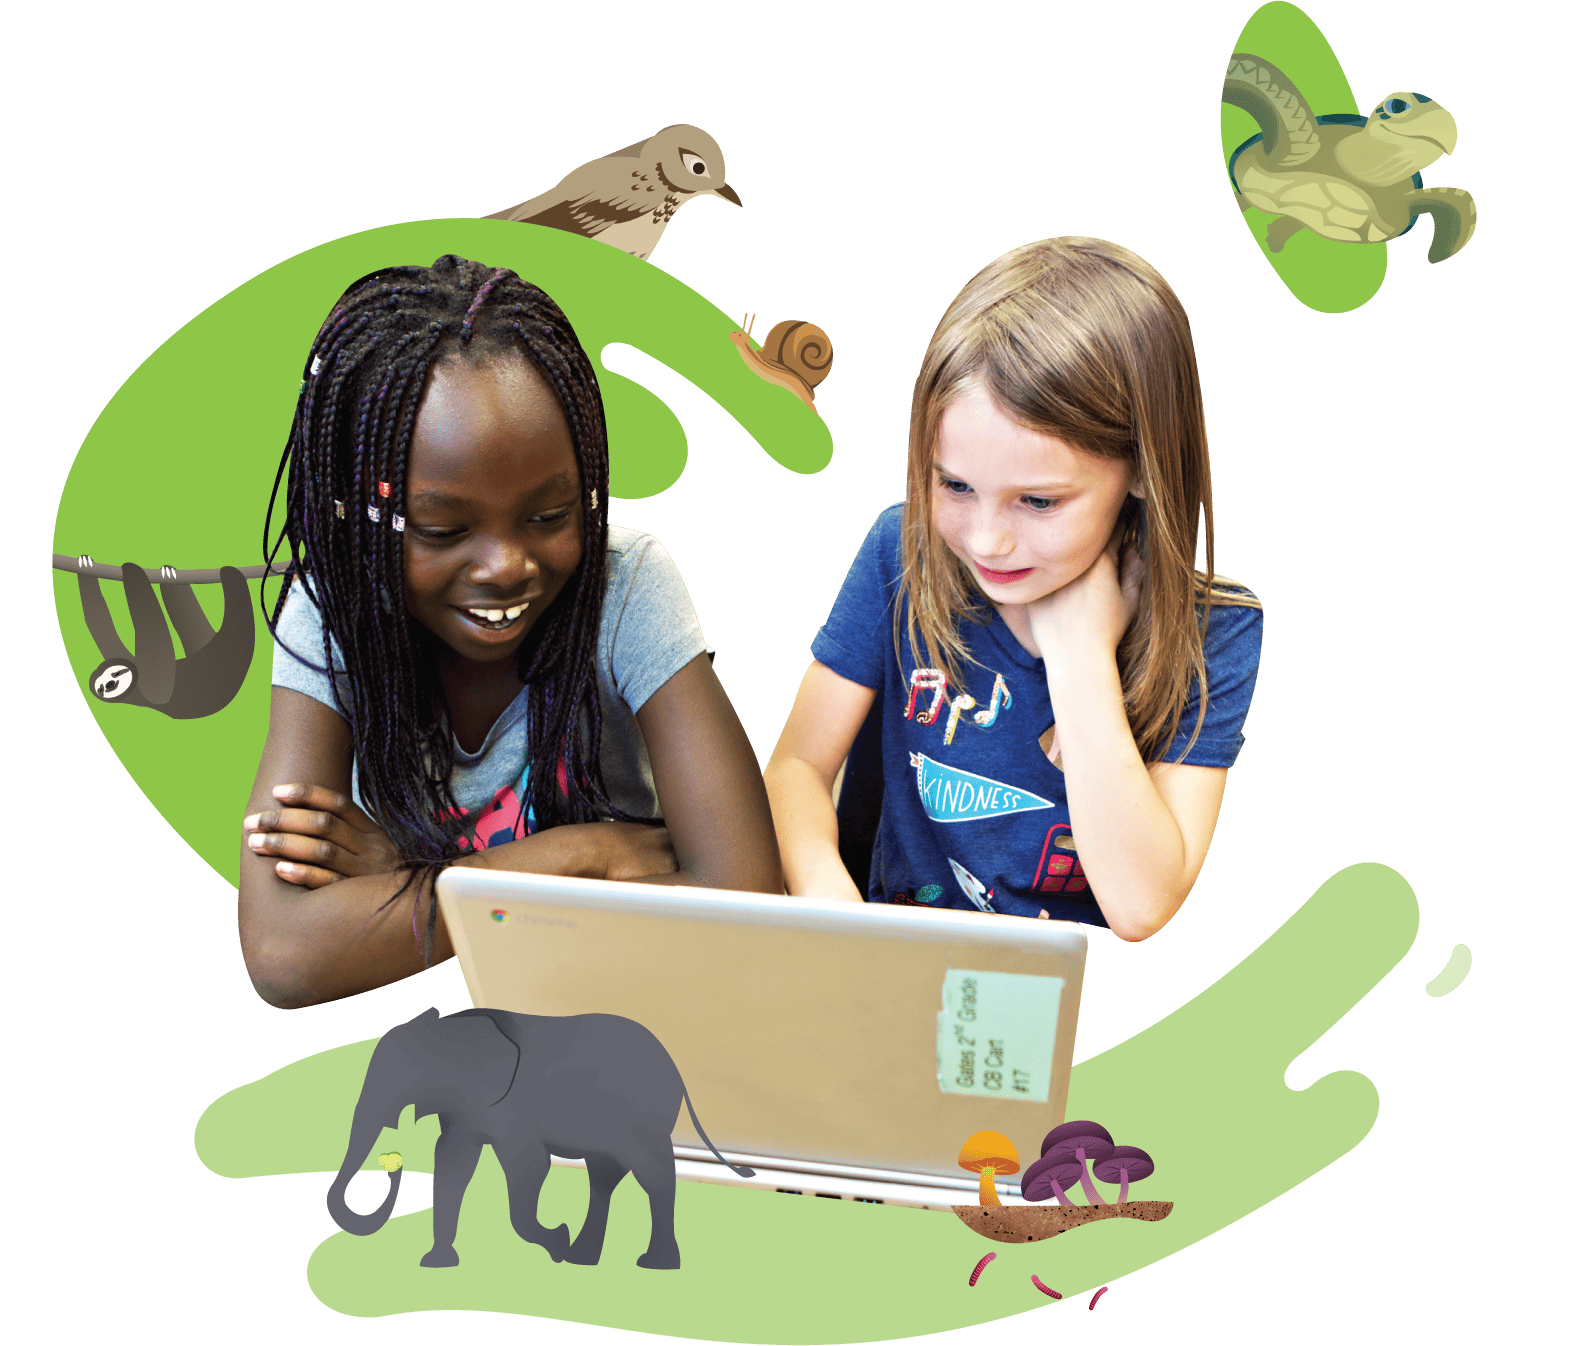 Two girls, one black with braids and one white with blonde hair, happily look at a tablet, surrounded by illustrated animals on a green abstract background.